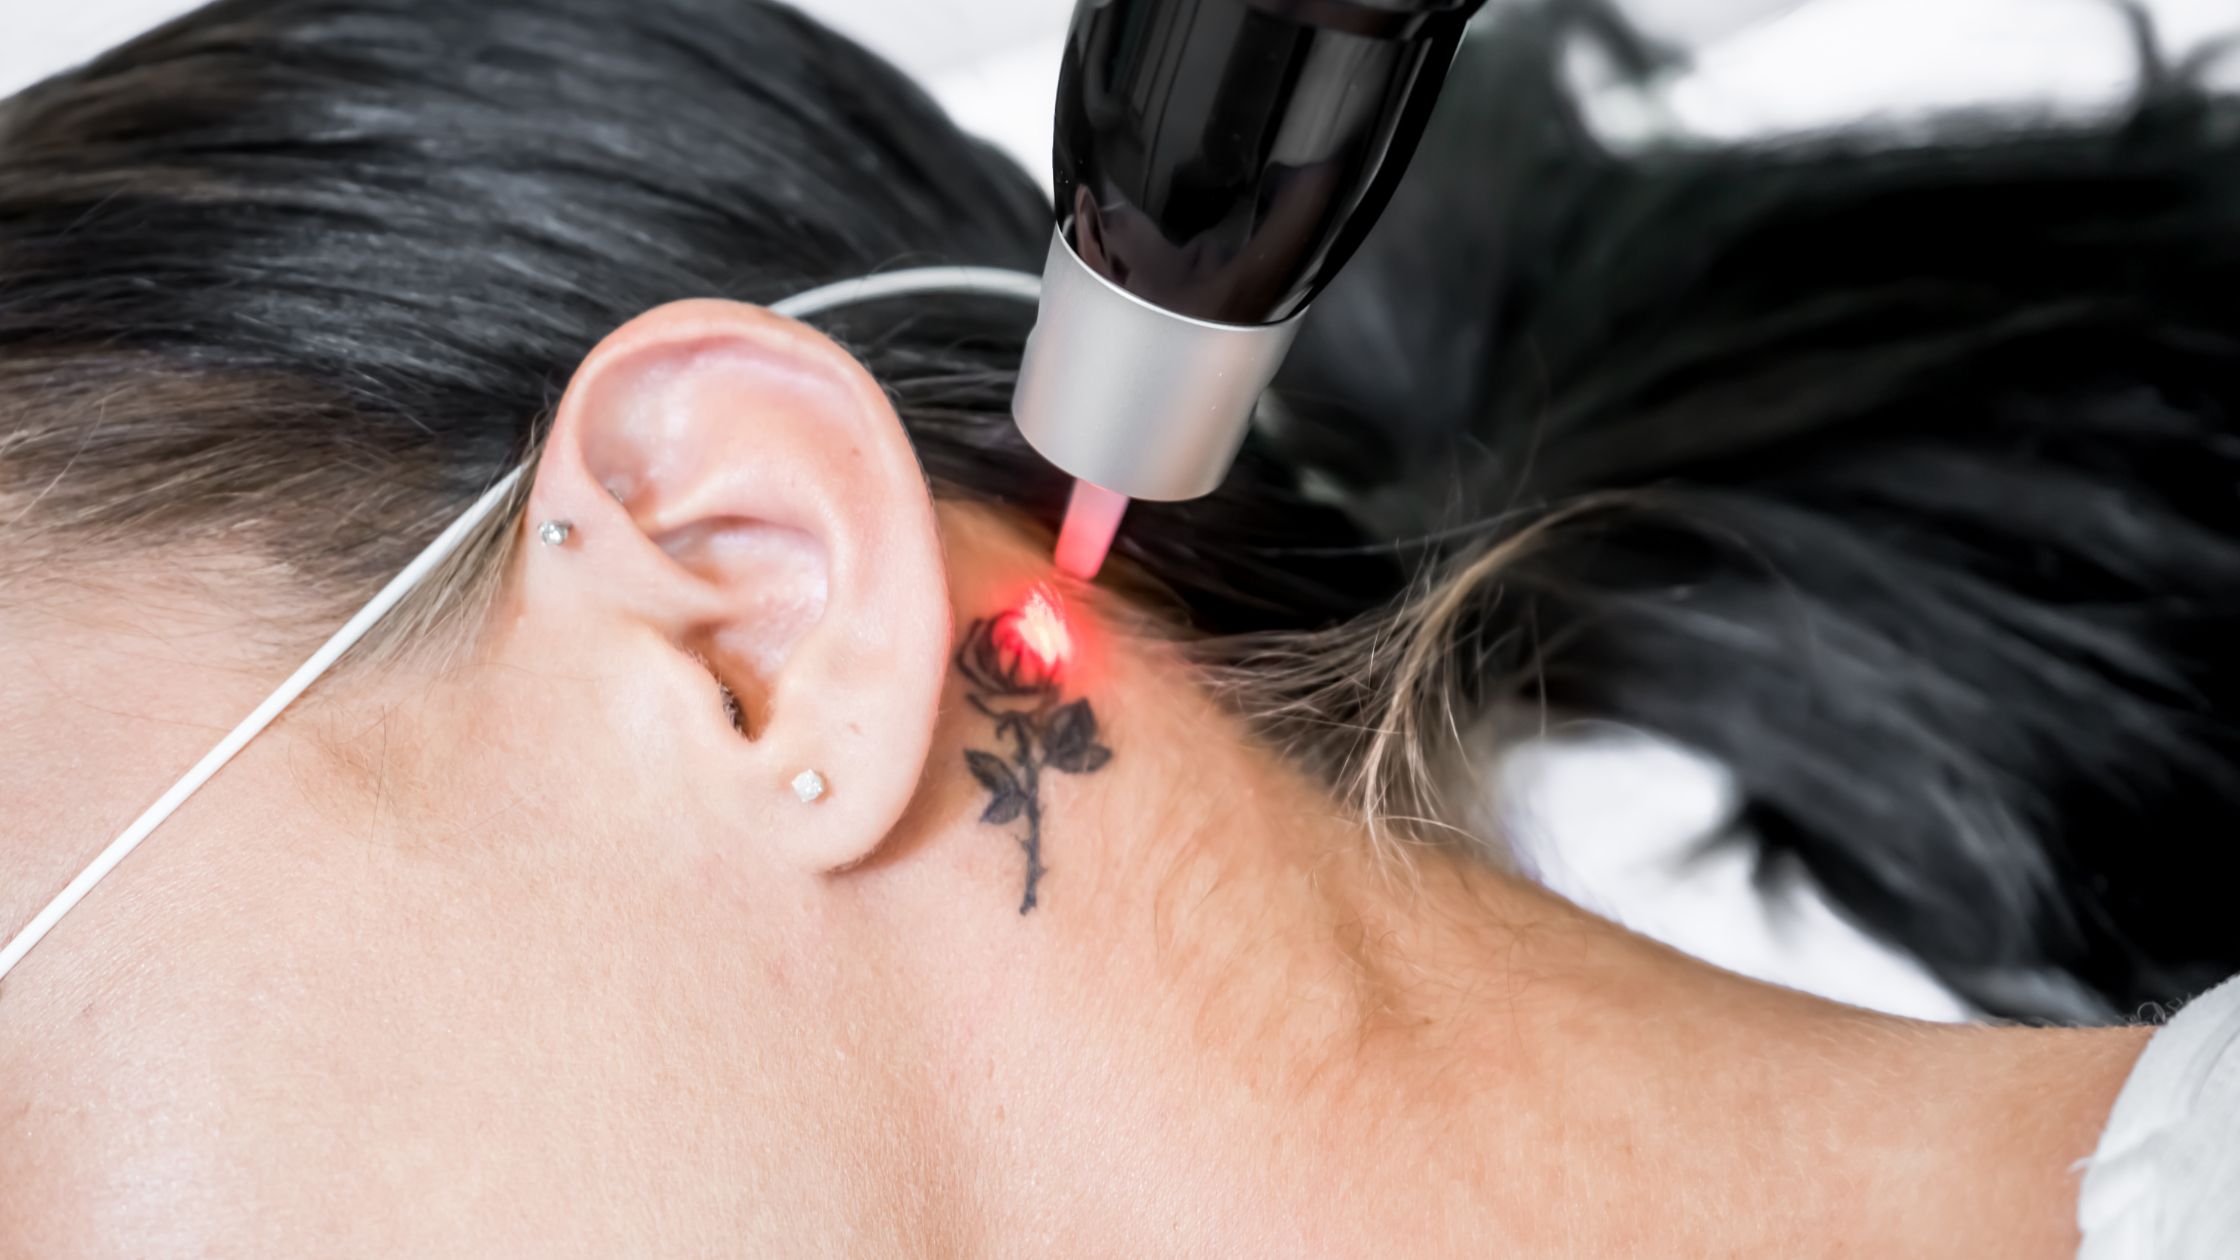 Black is the easiest colour of tattoo ink to remove, and grey wash  shadowing responds particularly well to laser tattoo removal. Thinking of  removing... | By Laser Tattoo Removal AustraliaFacebook